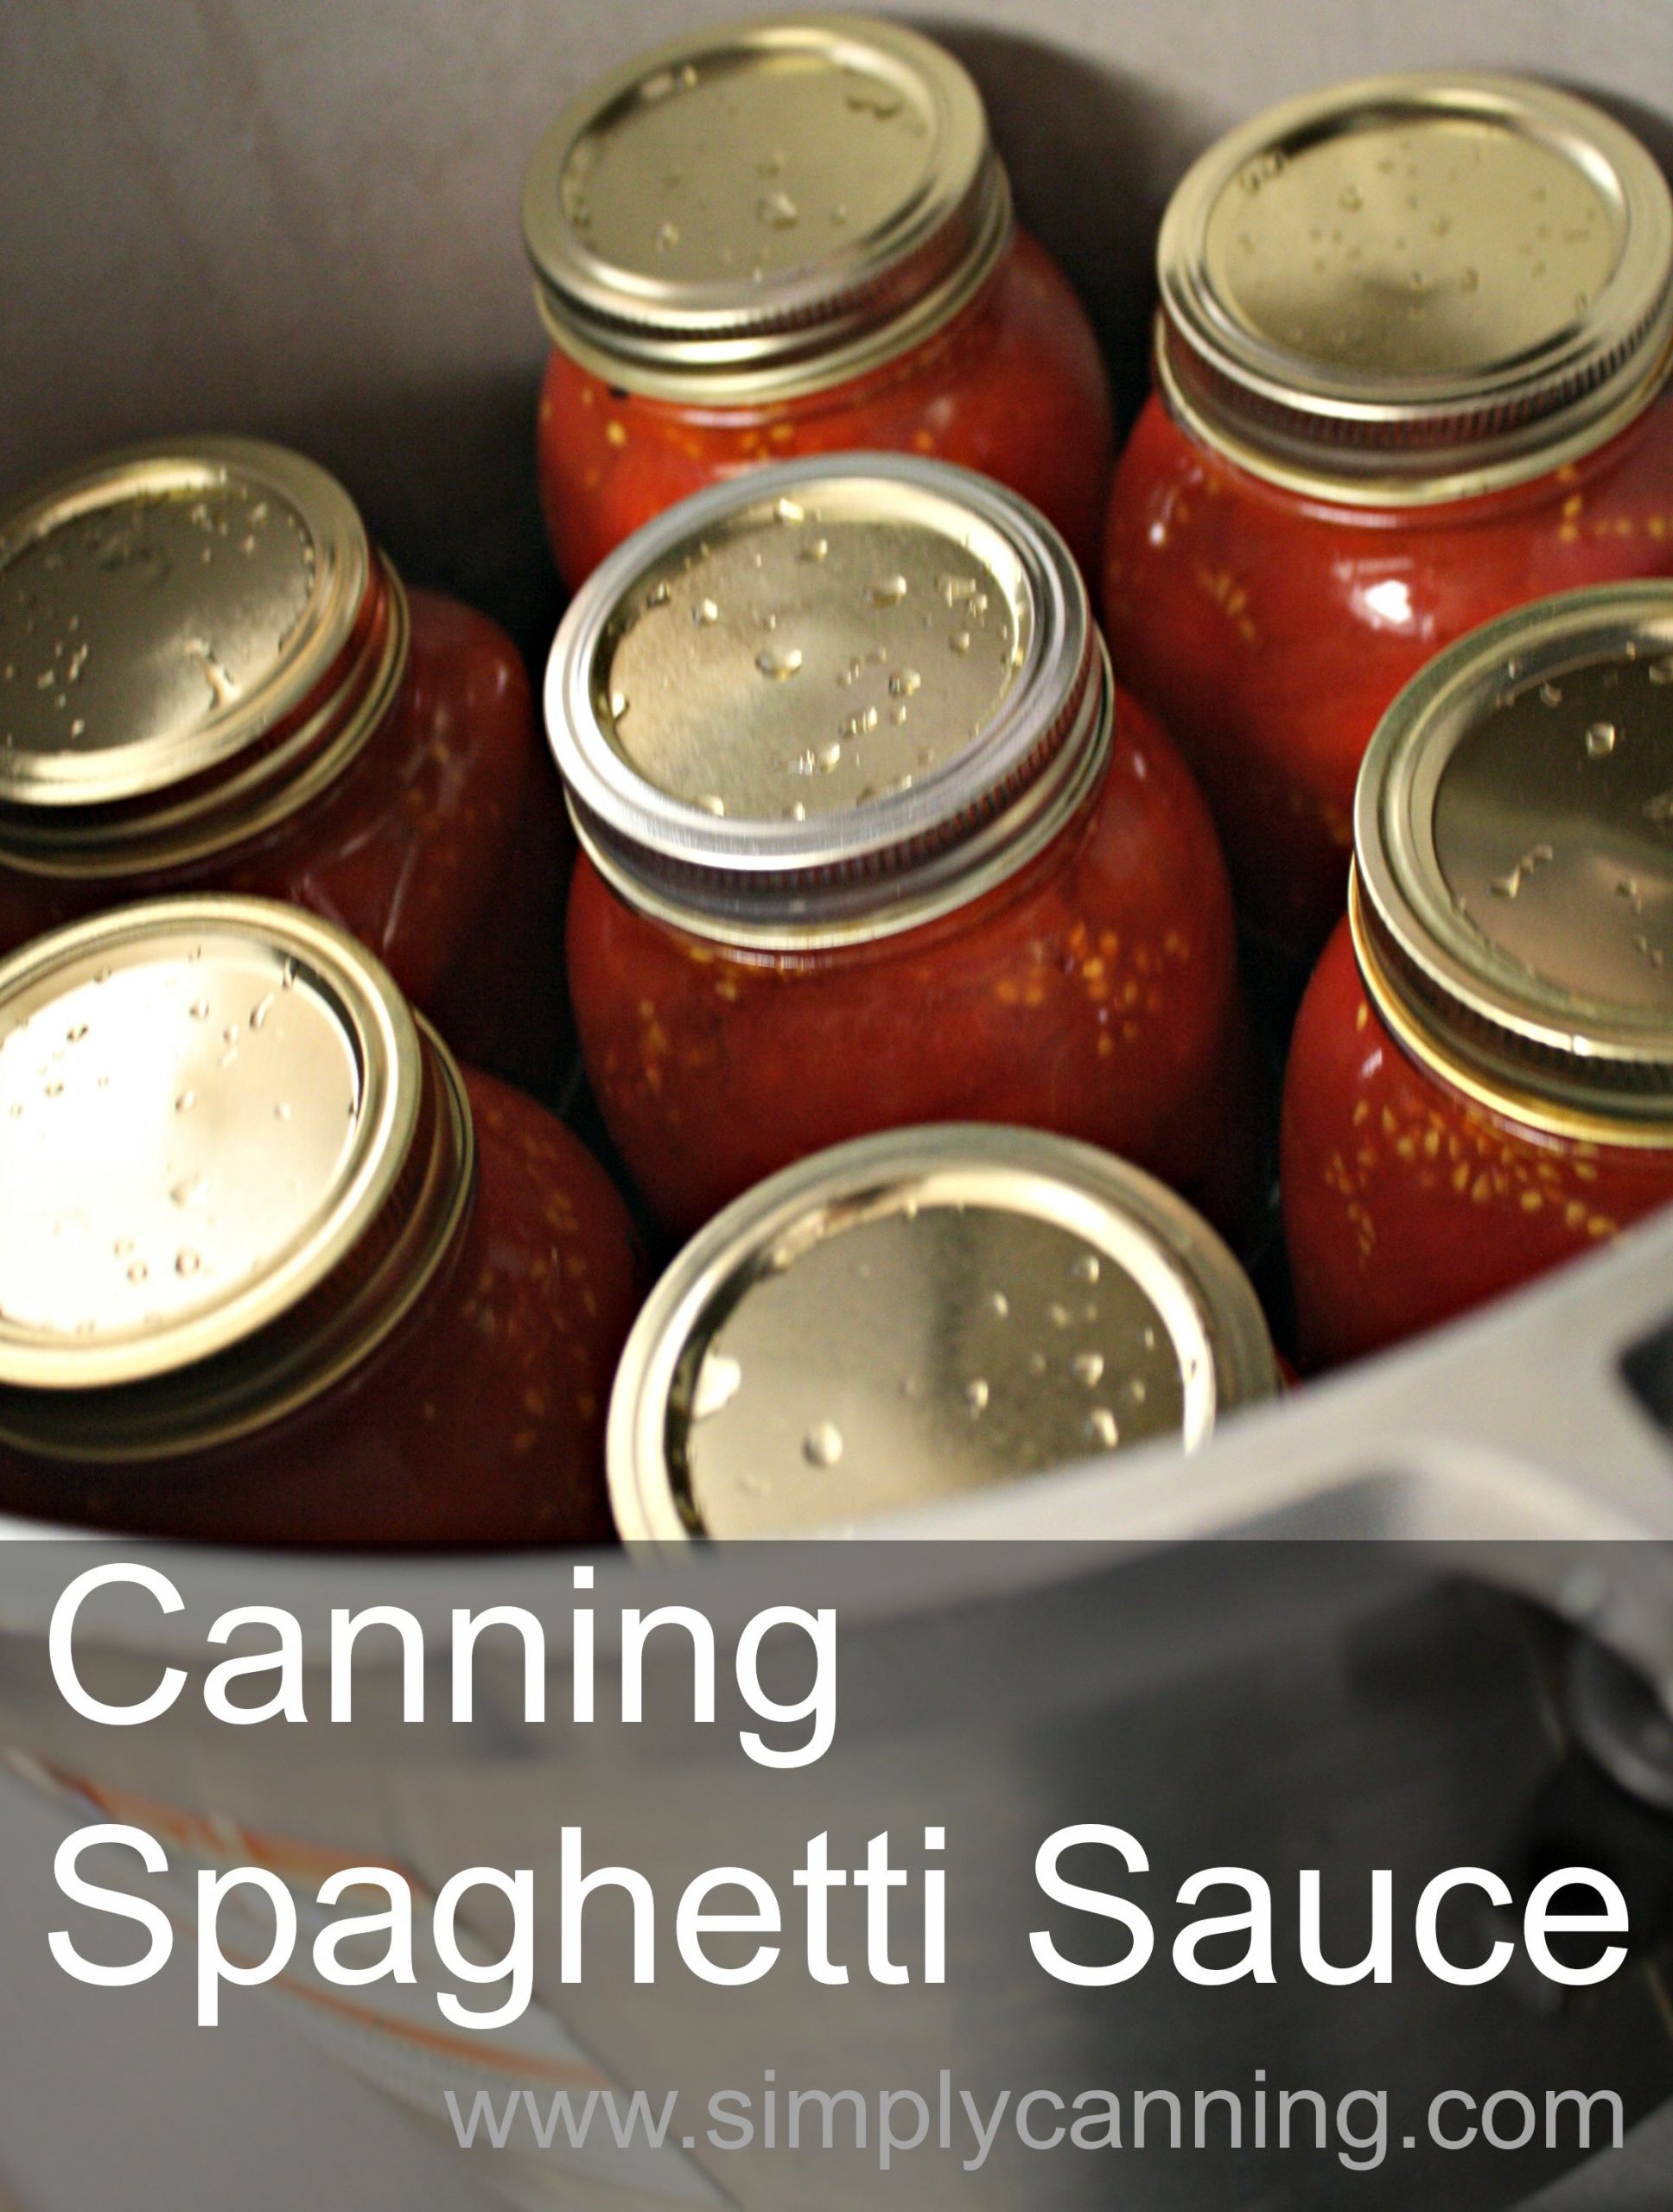 Pressure Canning Tomato Sauce
 Canning Spaghetti Sauce Recipe with meat that will save